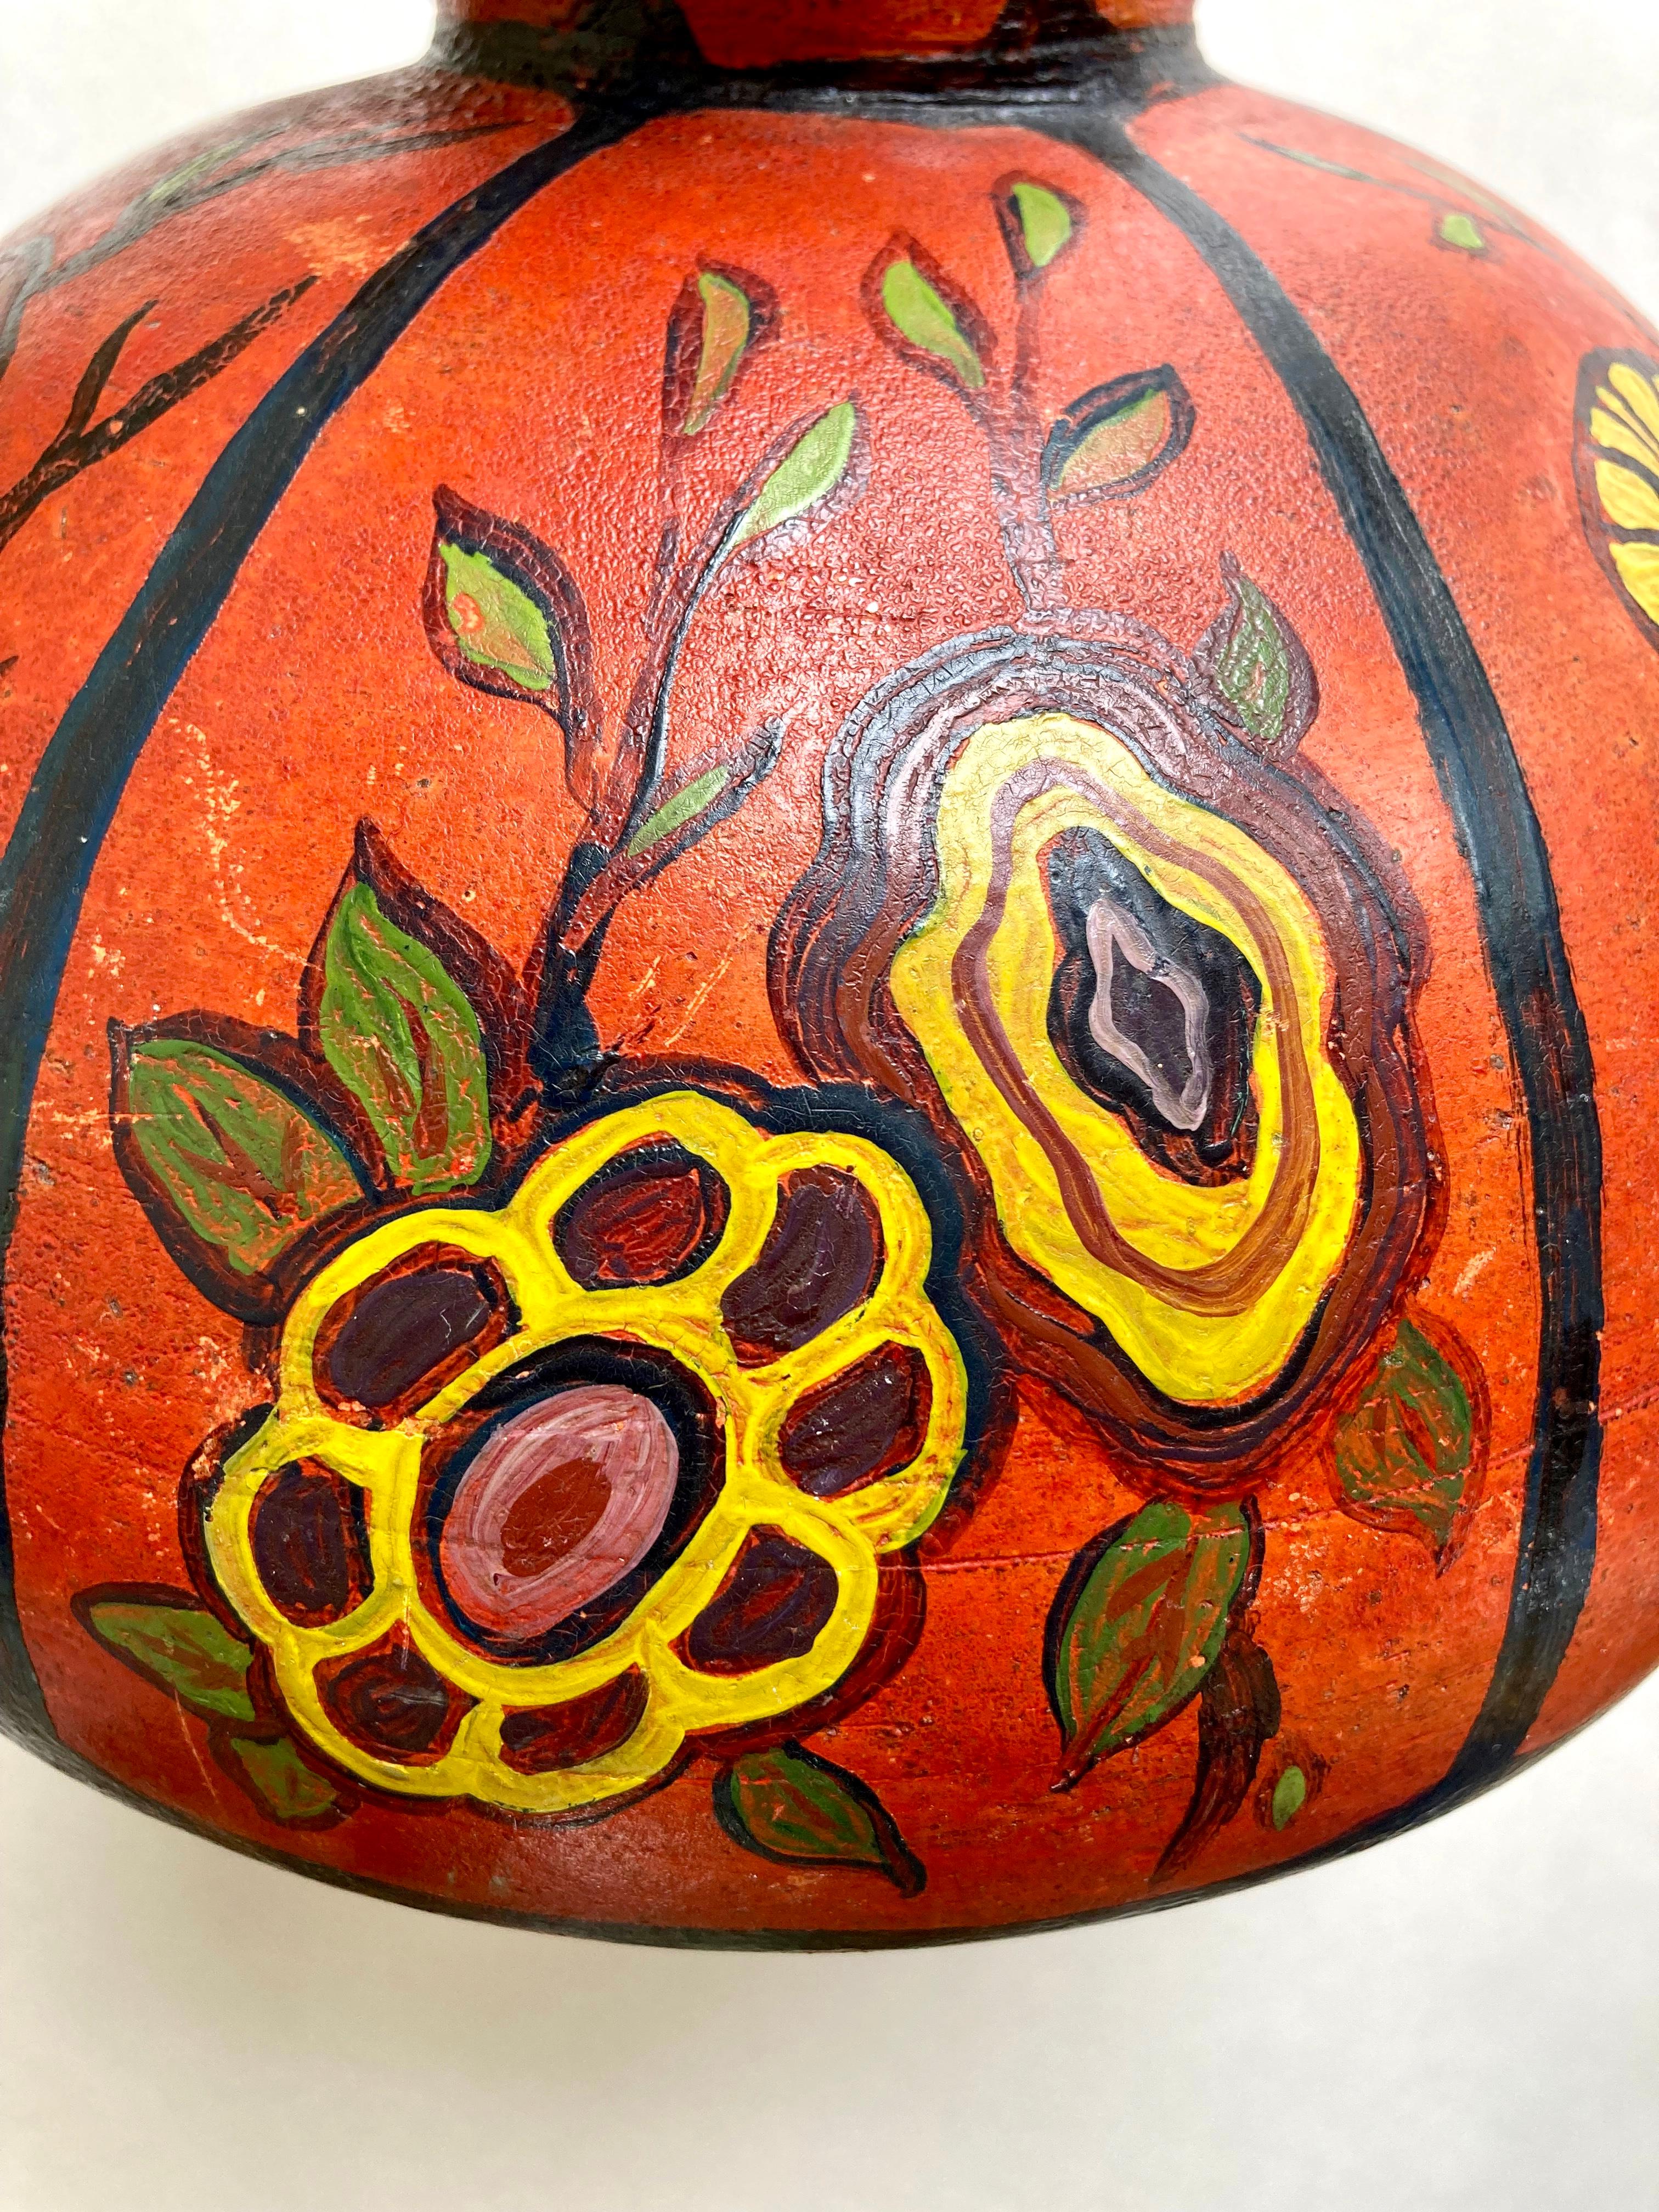 Antique Hand-Thrown and Hand-Painted Art Pottery Vase with Floral Motifs   For Sale 1